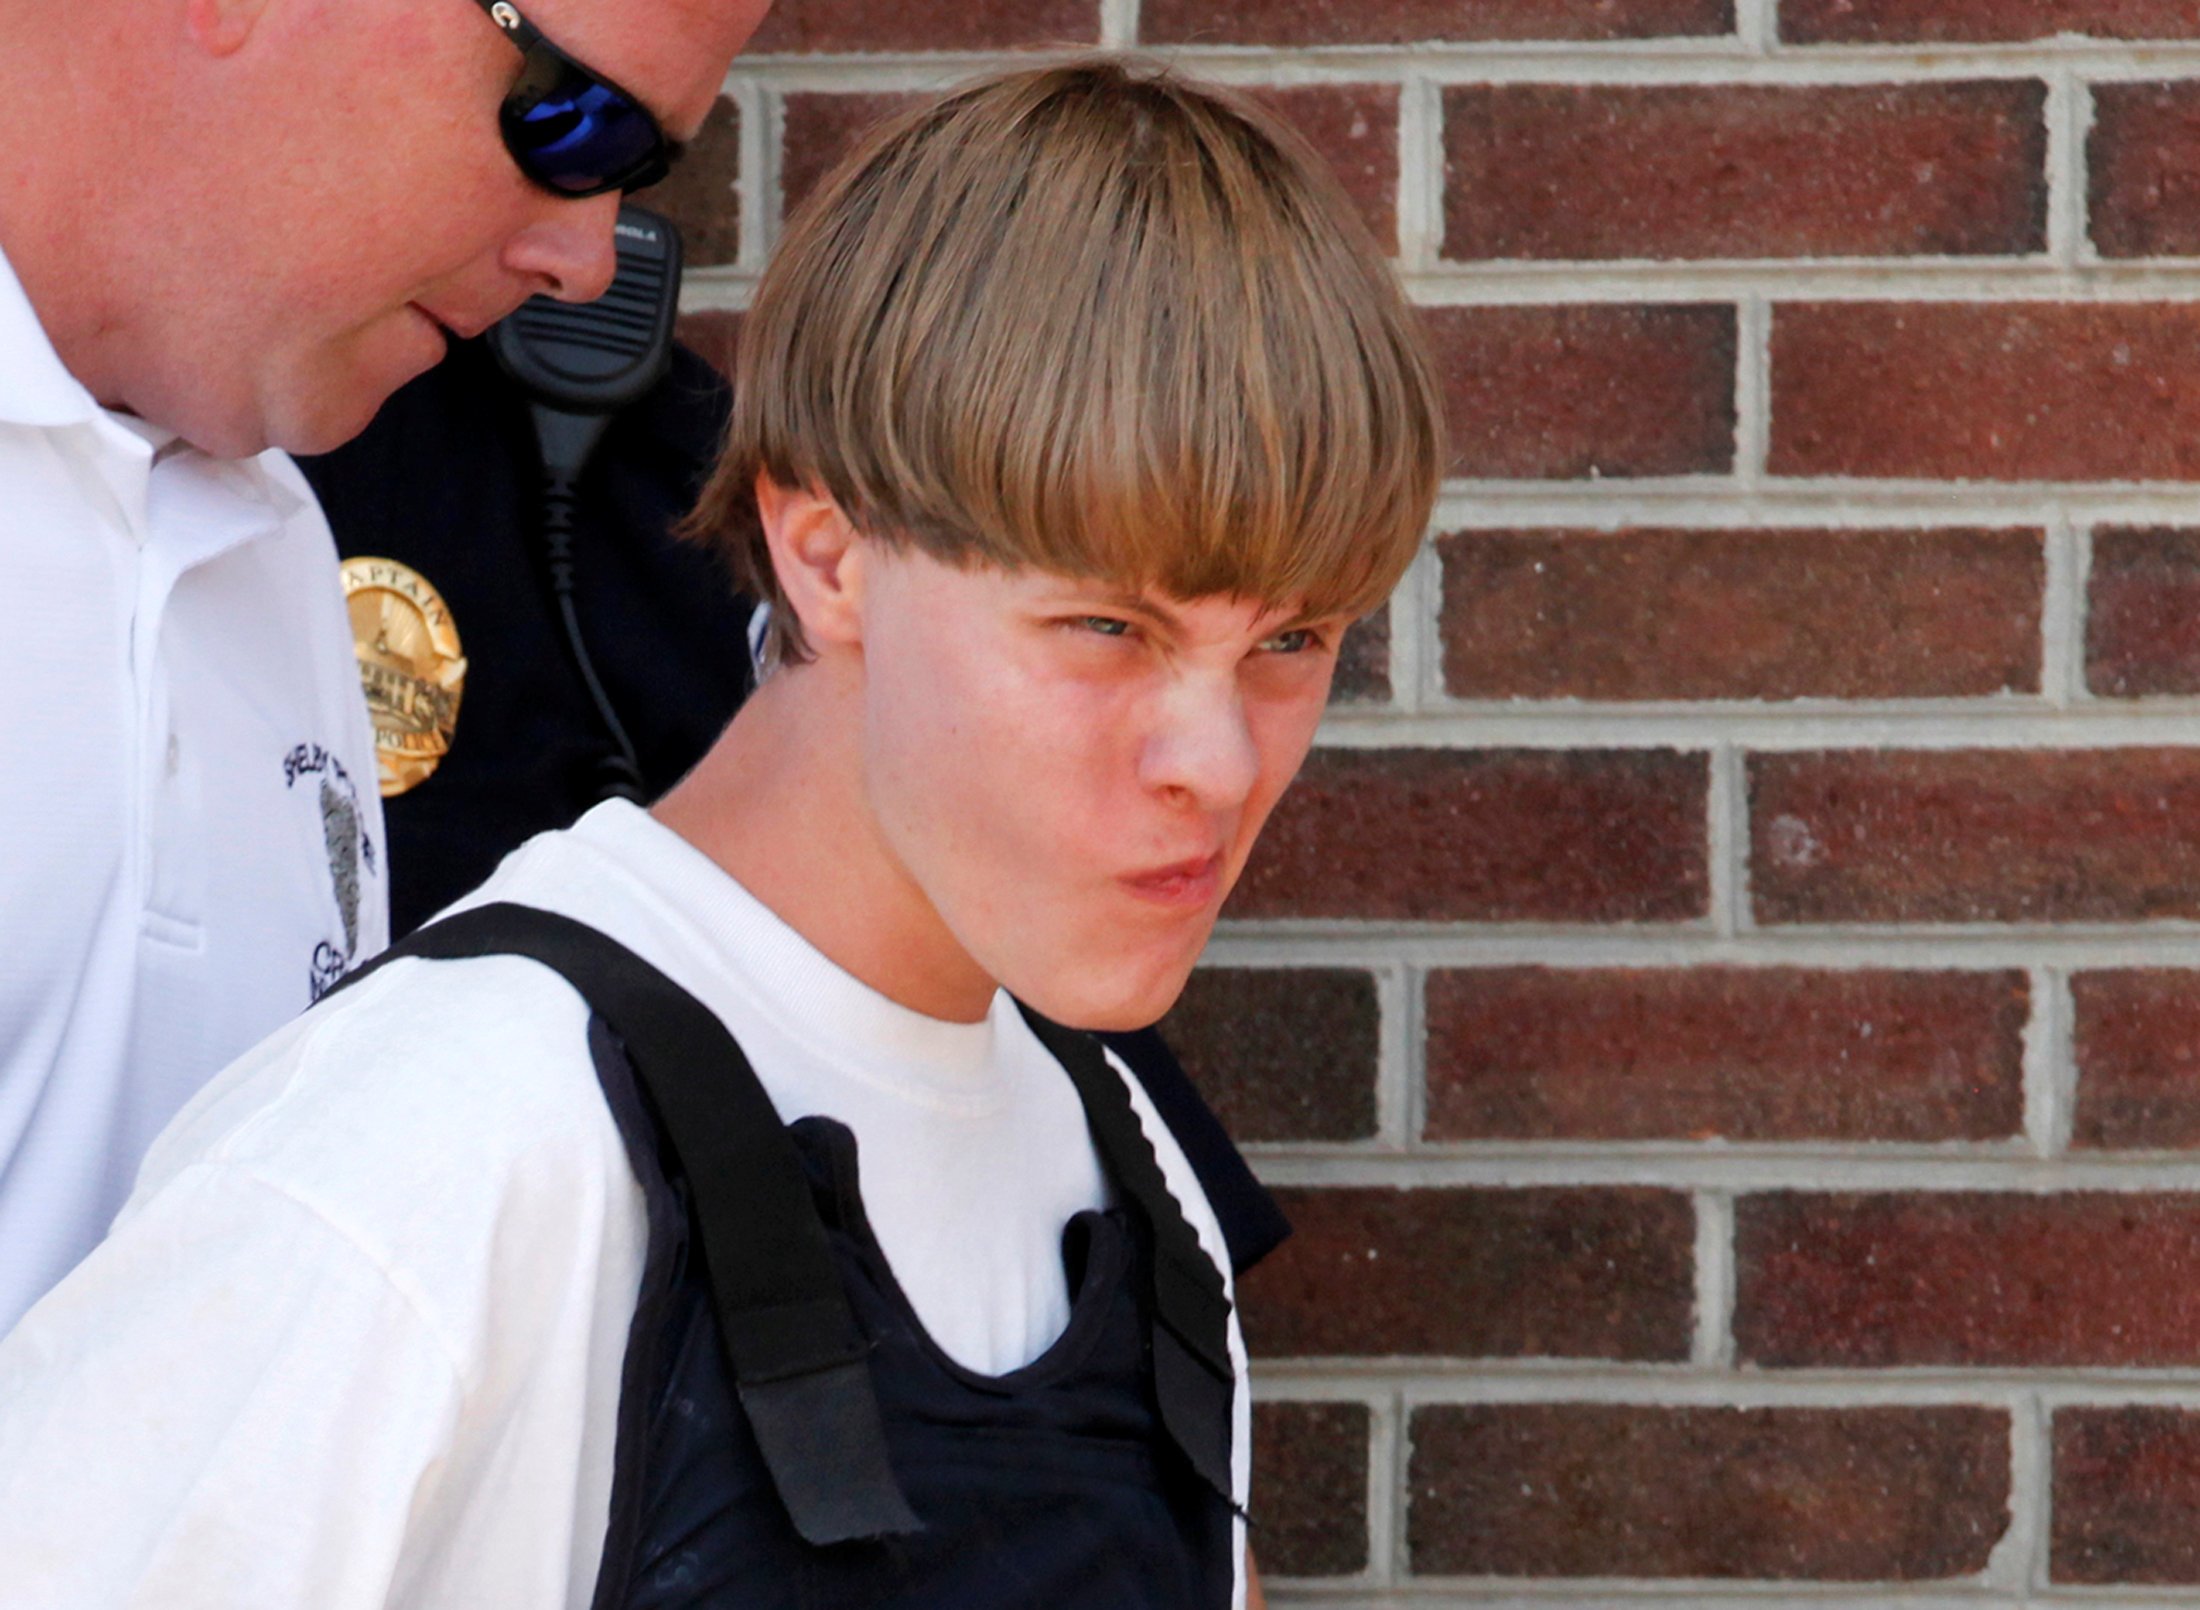 File photo of police leading suspected shooter Dylann Roof into the courthouse in Shelby